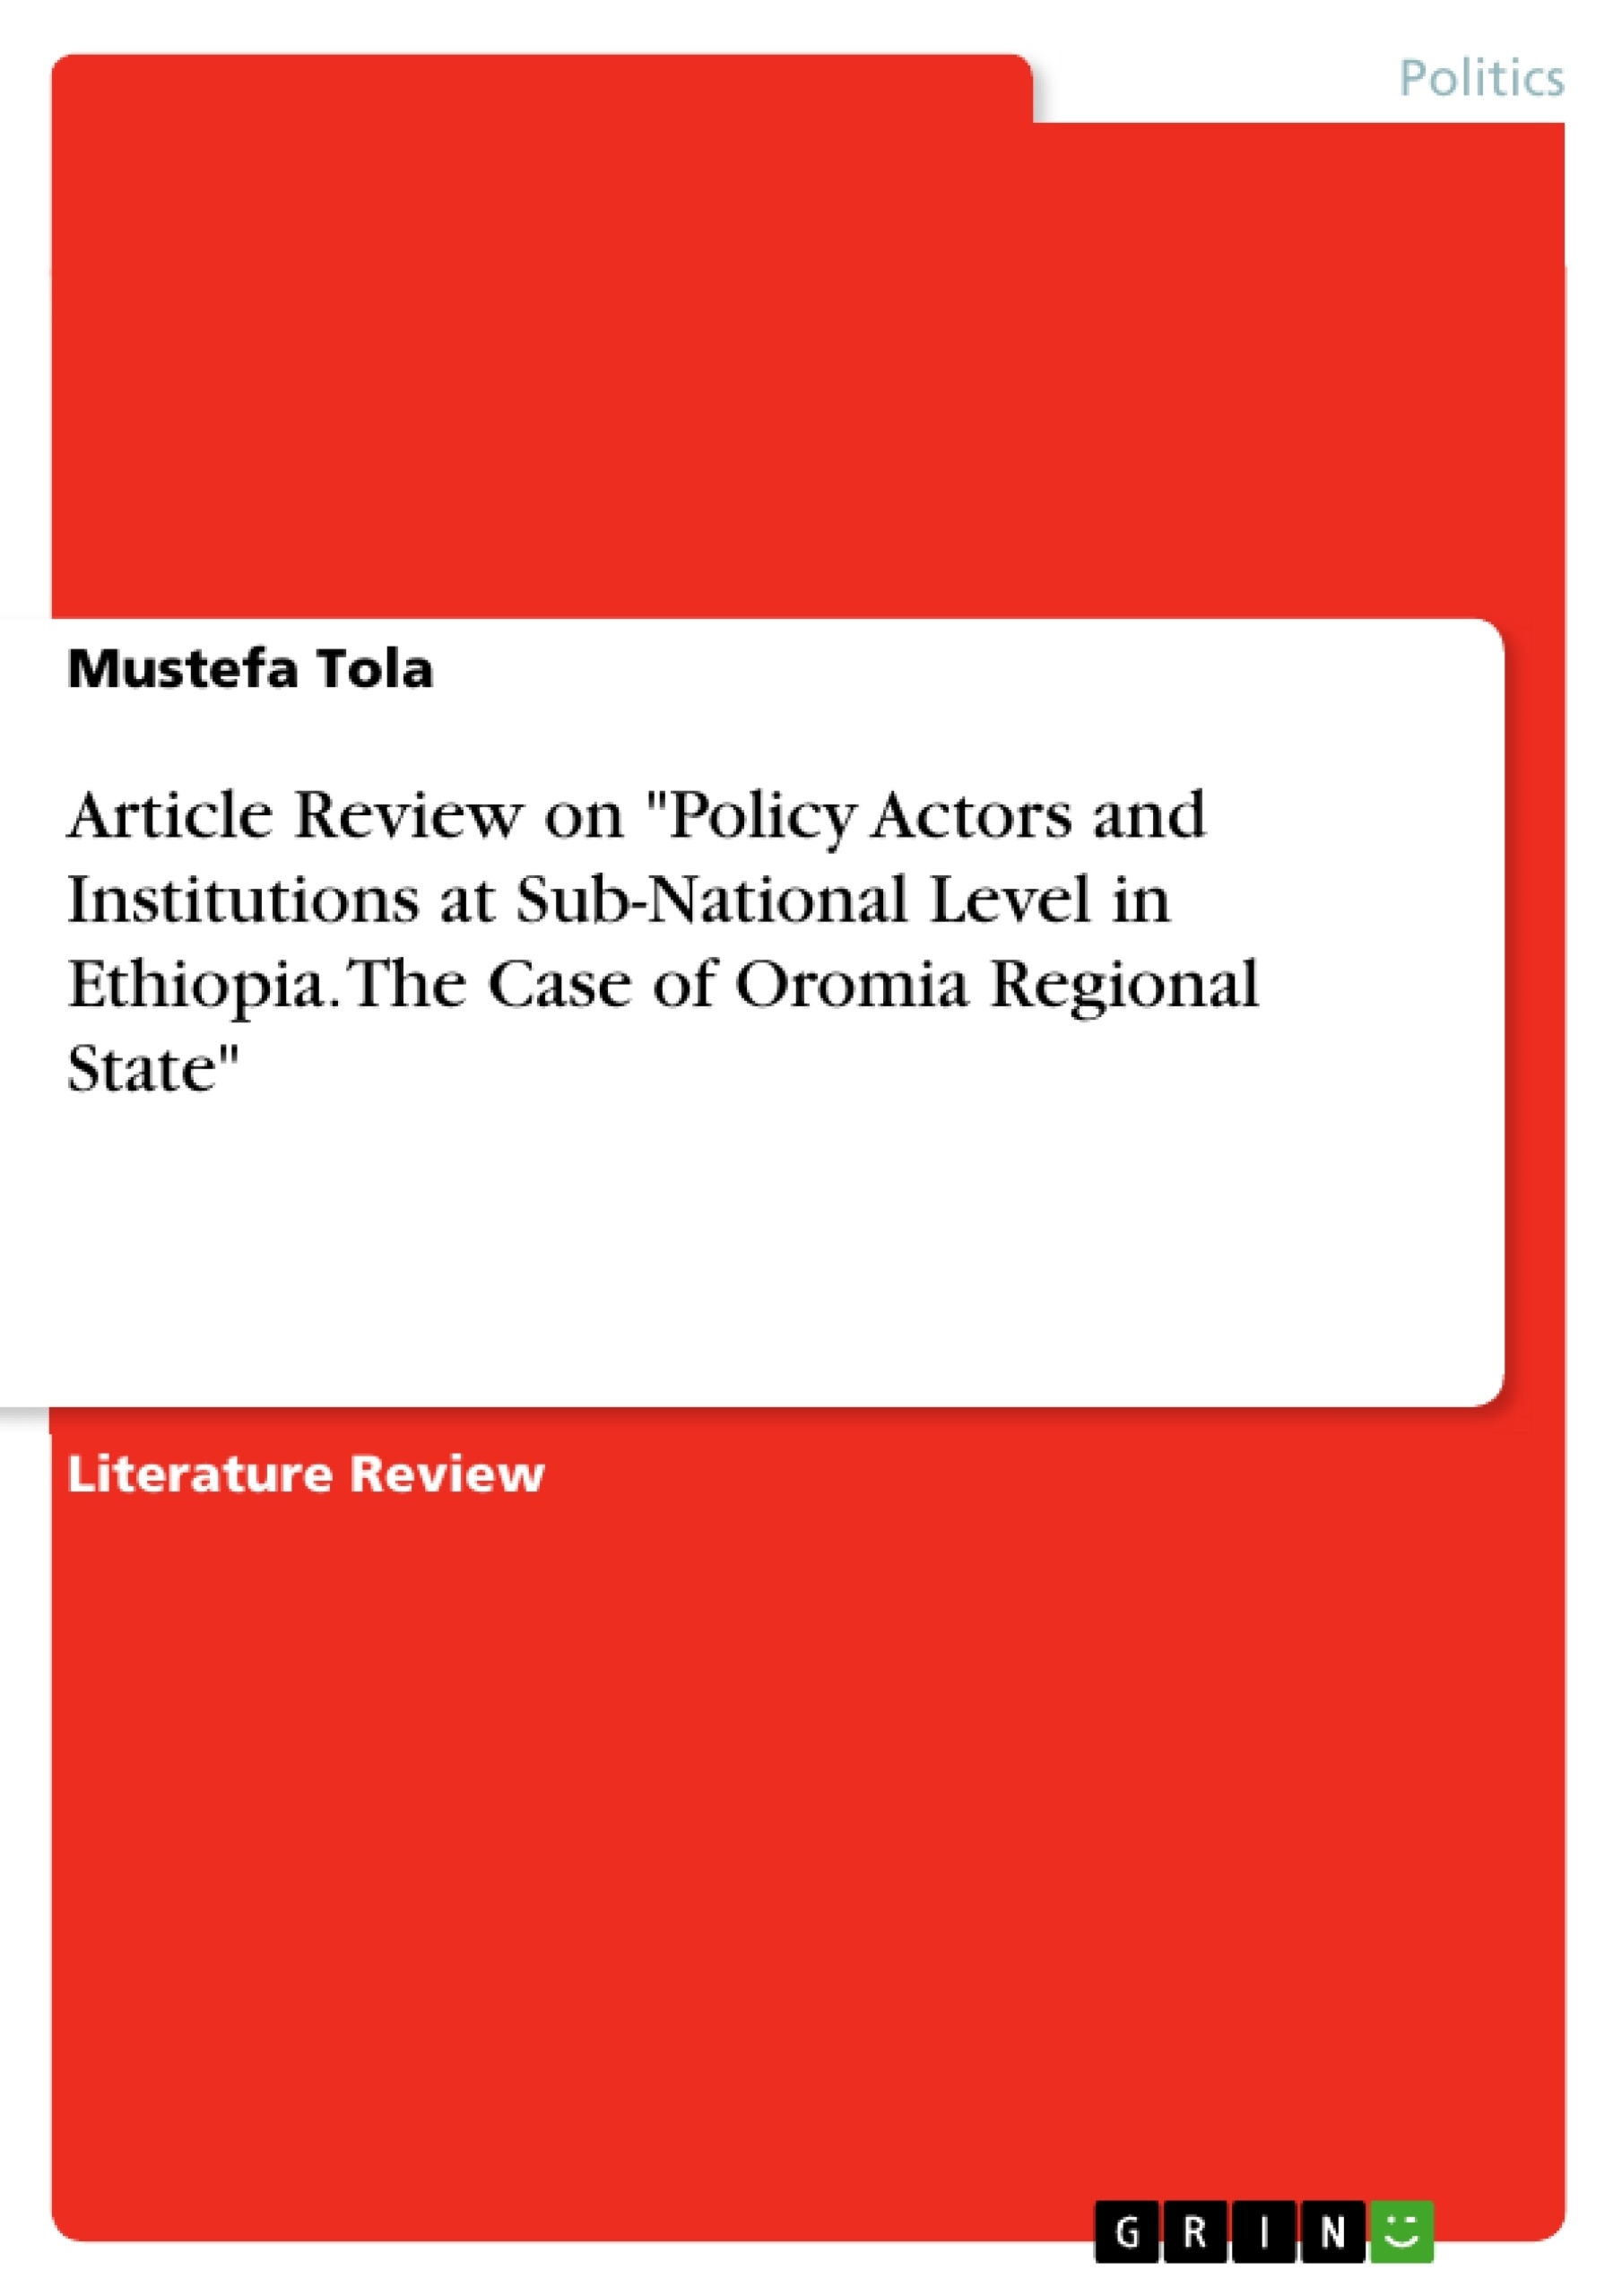 Title: Article Review on "Policy Actors and Institutions at Sub-National Level in Ethiopia. The Case of Oromia Regional State"